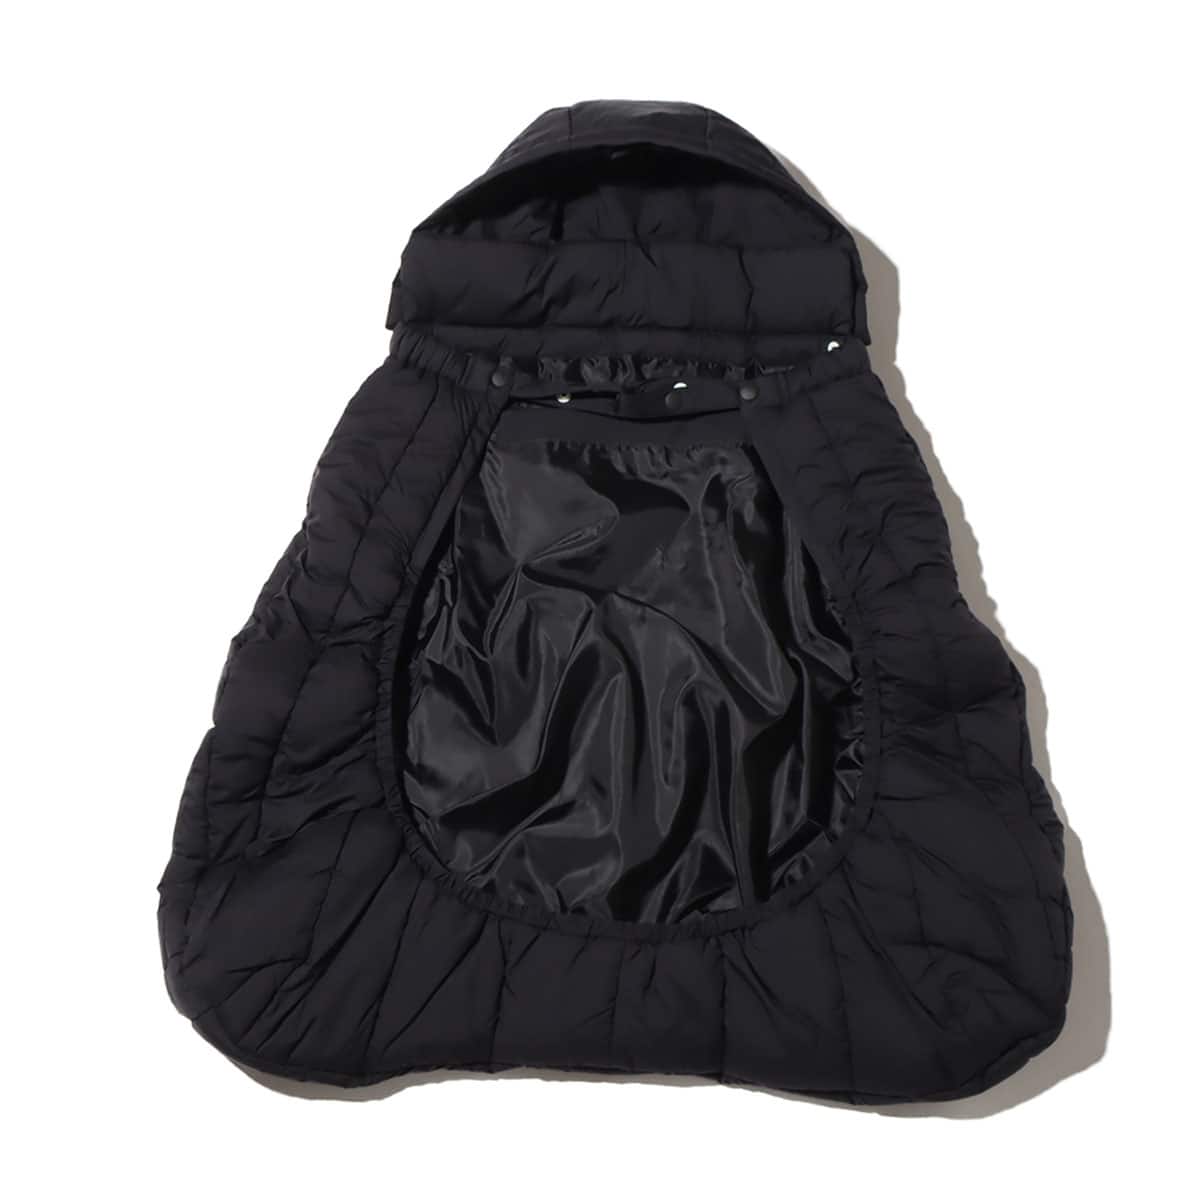 The North Face baby shell blanket black www.krzysztofbialy.com